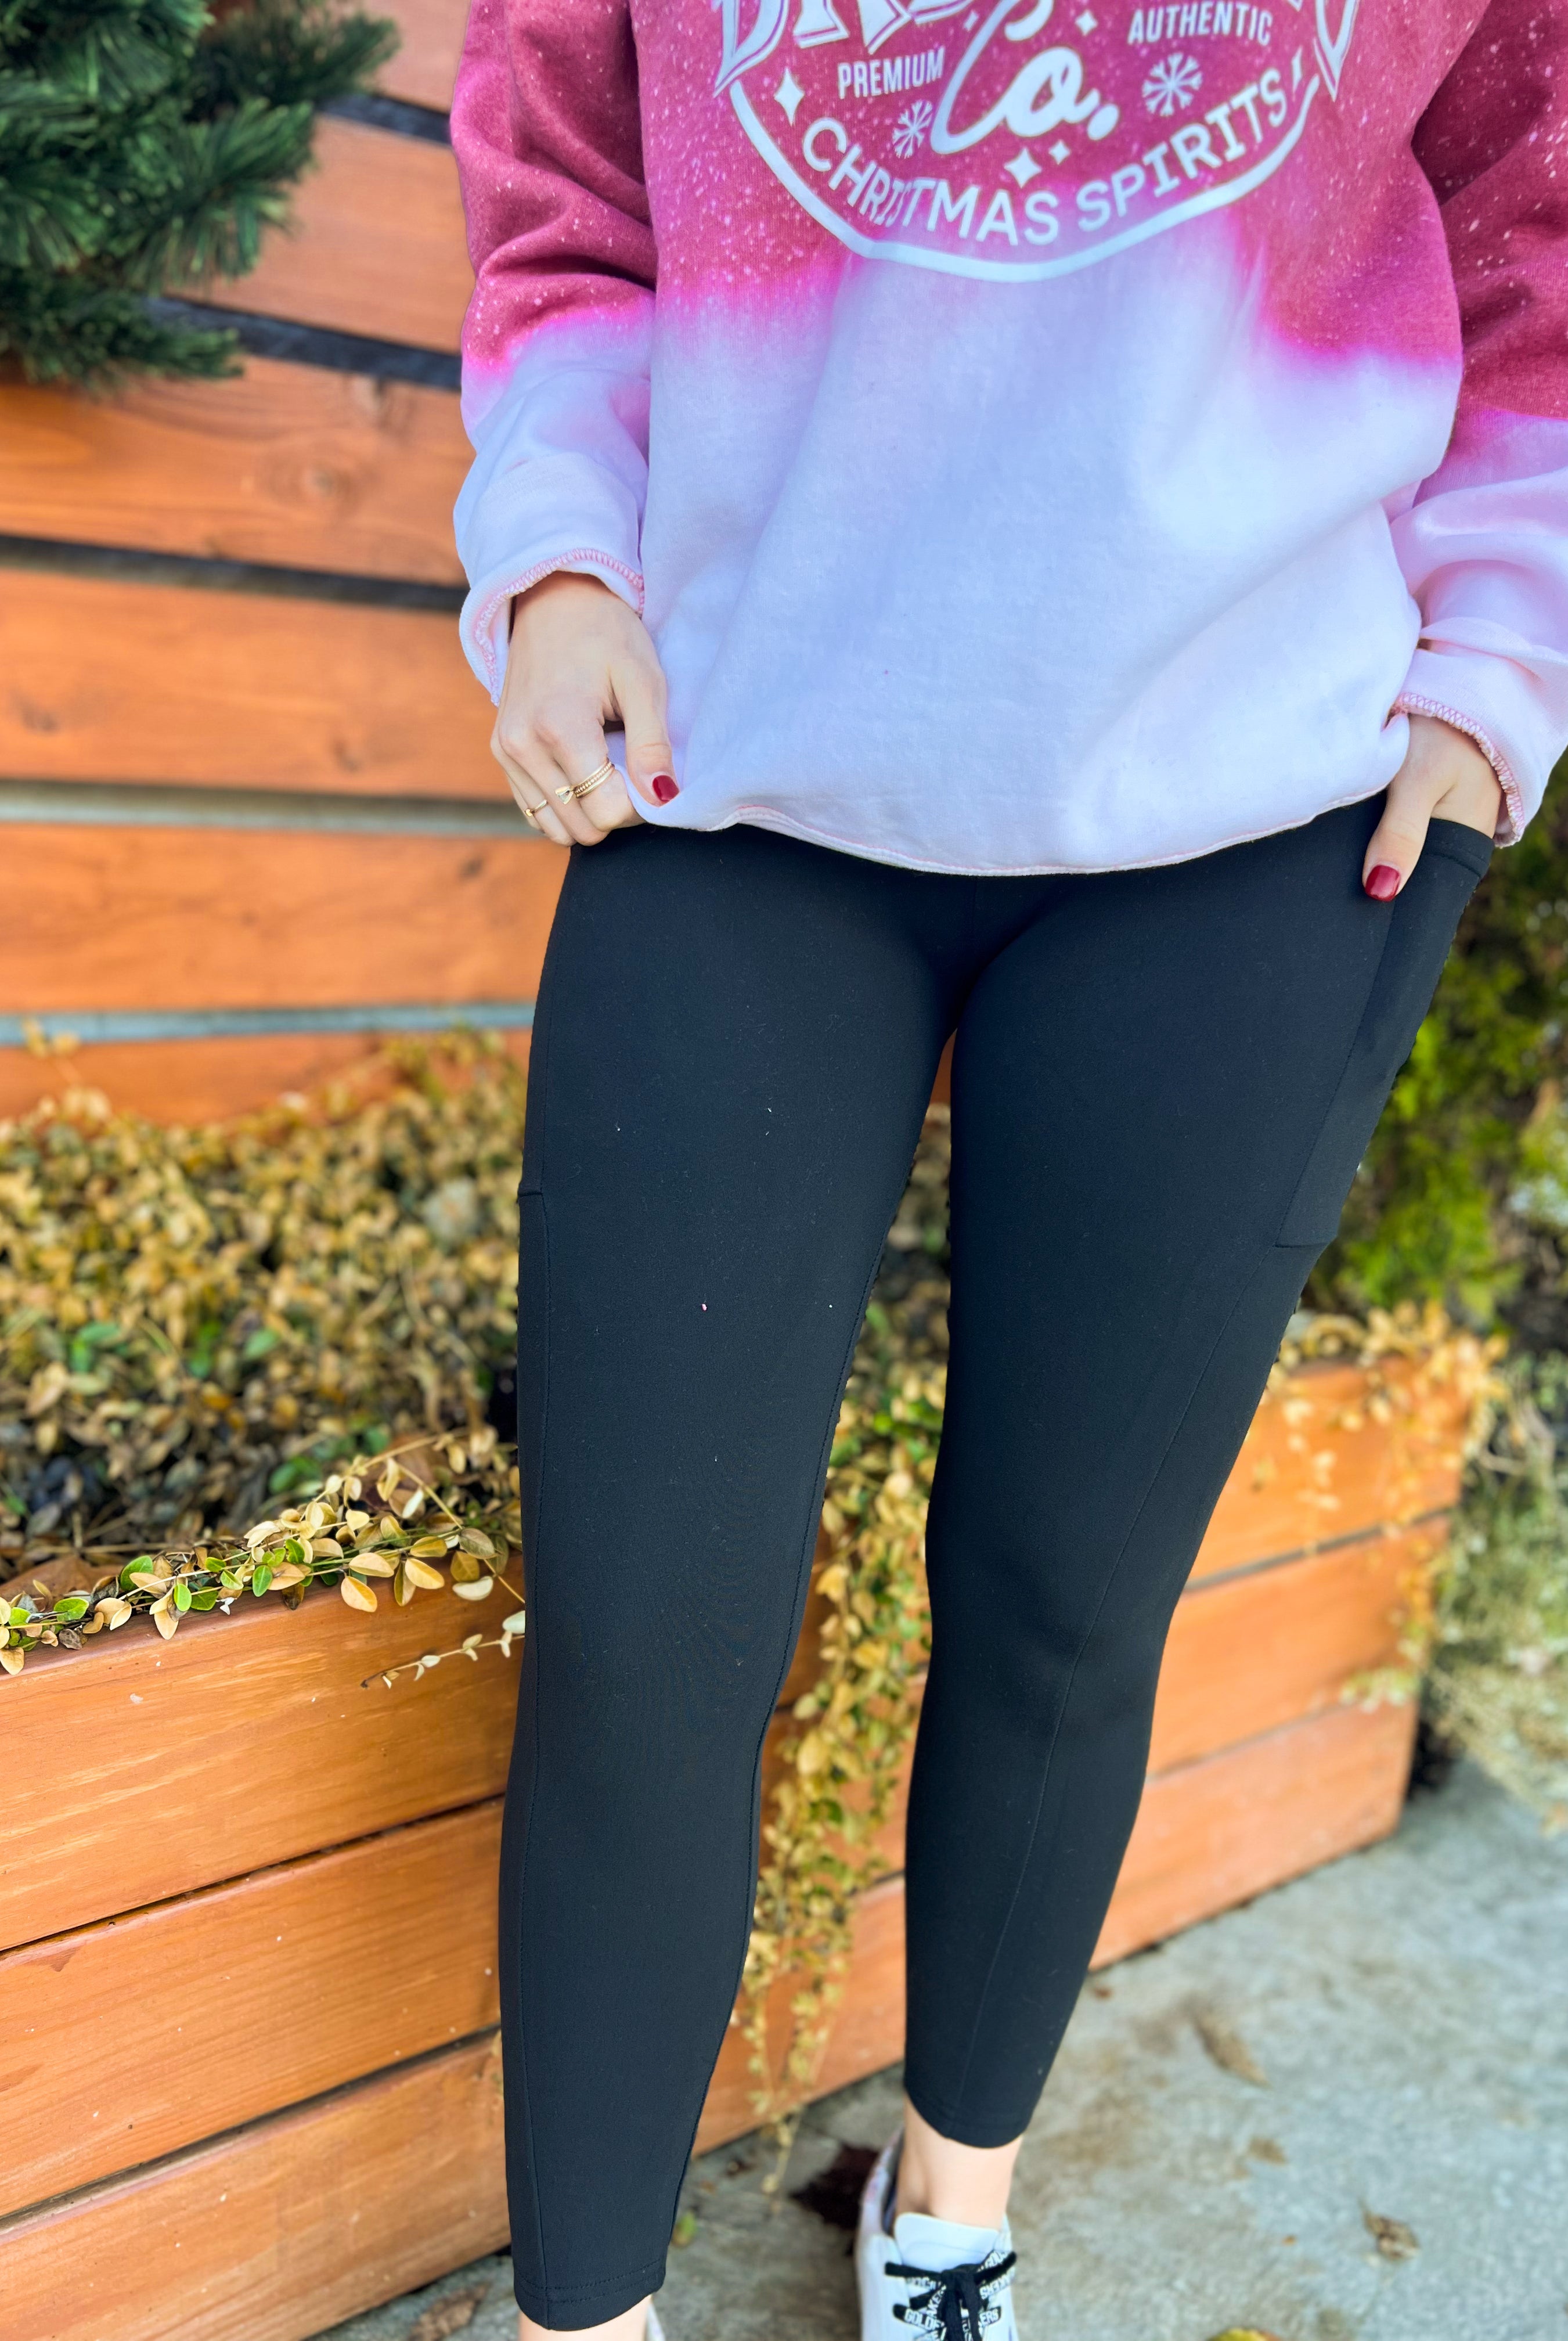 Living in These Fleece Lined Leggings-220 Joggers/Leggings-The Lovely Closet-The Lovely Closet, Women's Fashion Boutique in Alexandria, KY